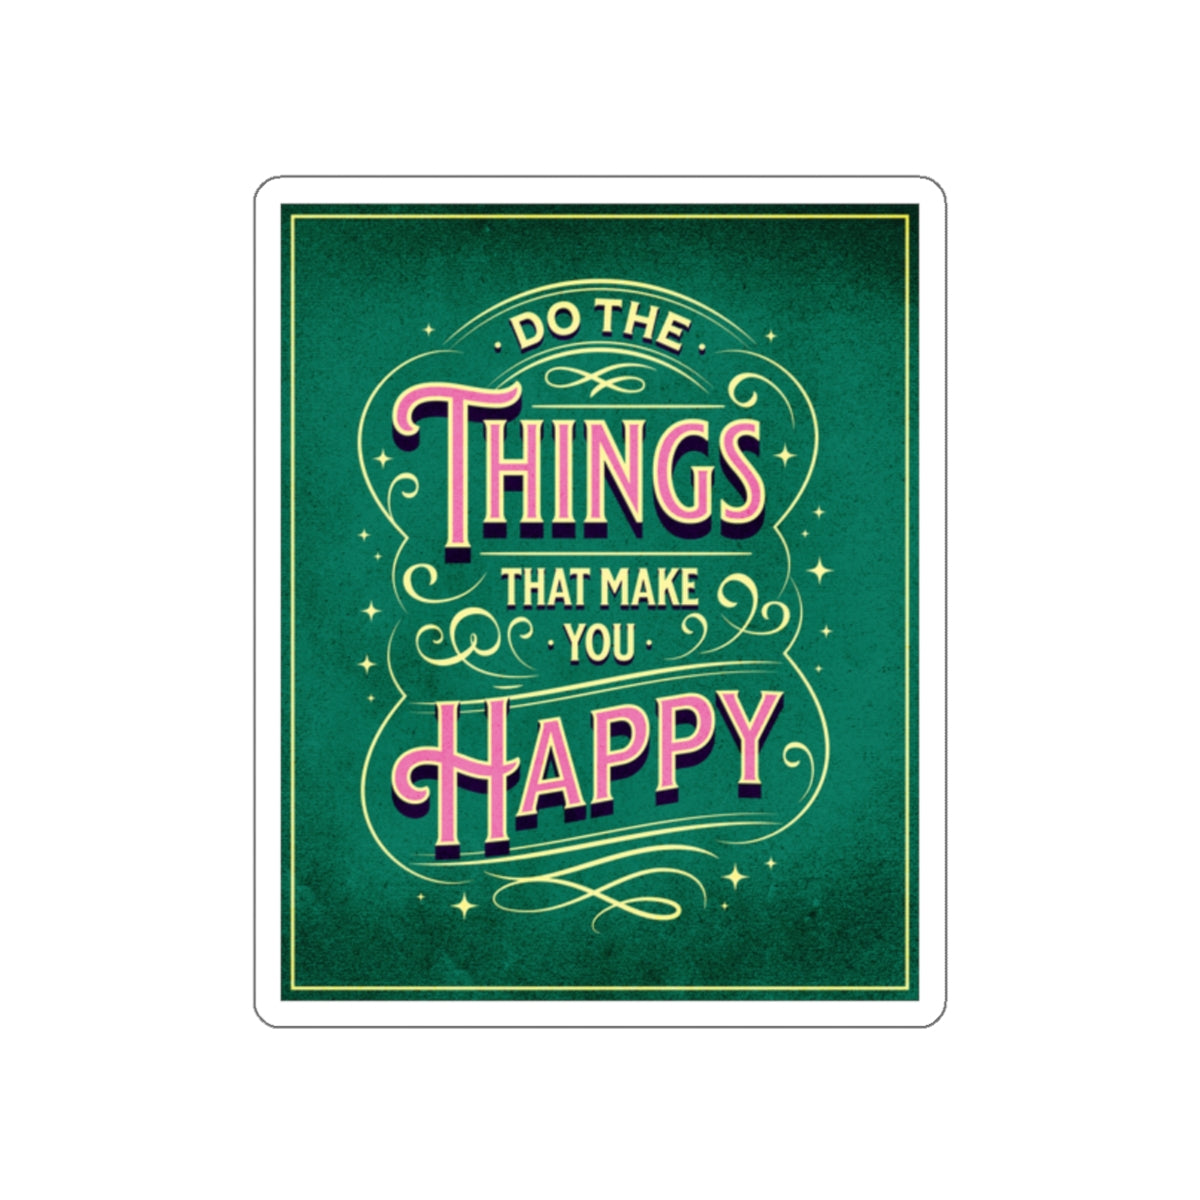 Do the Things That Make You Happy - Die-Cut Stickers